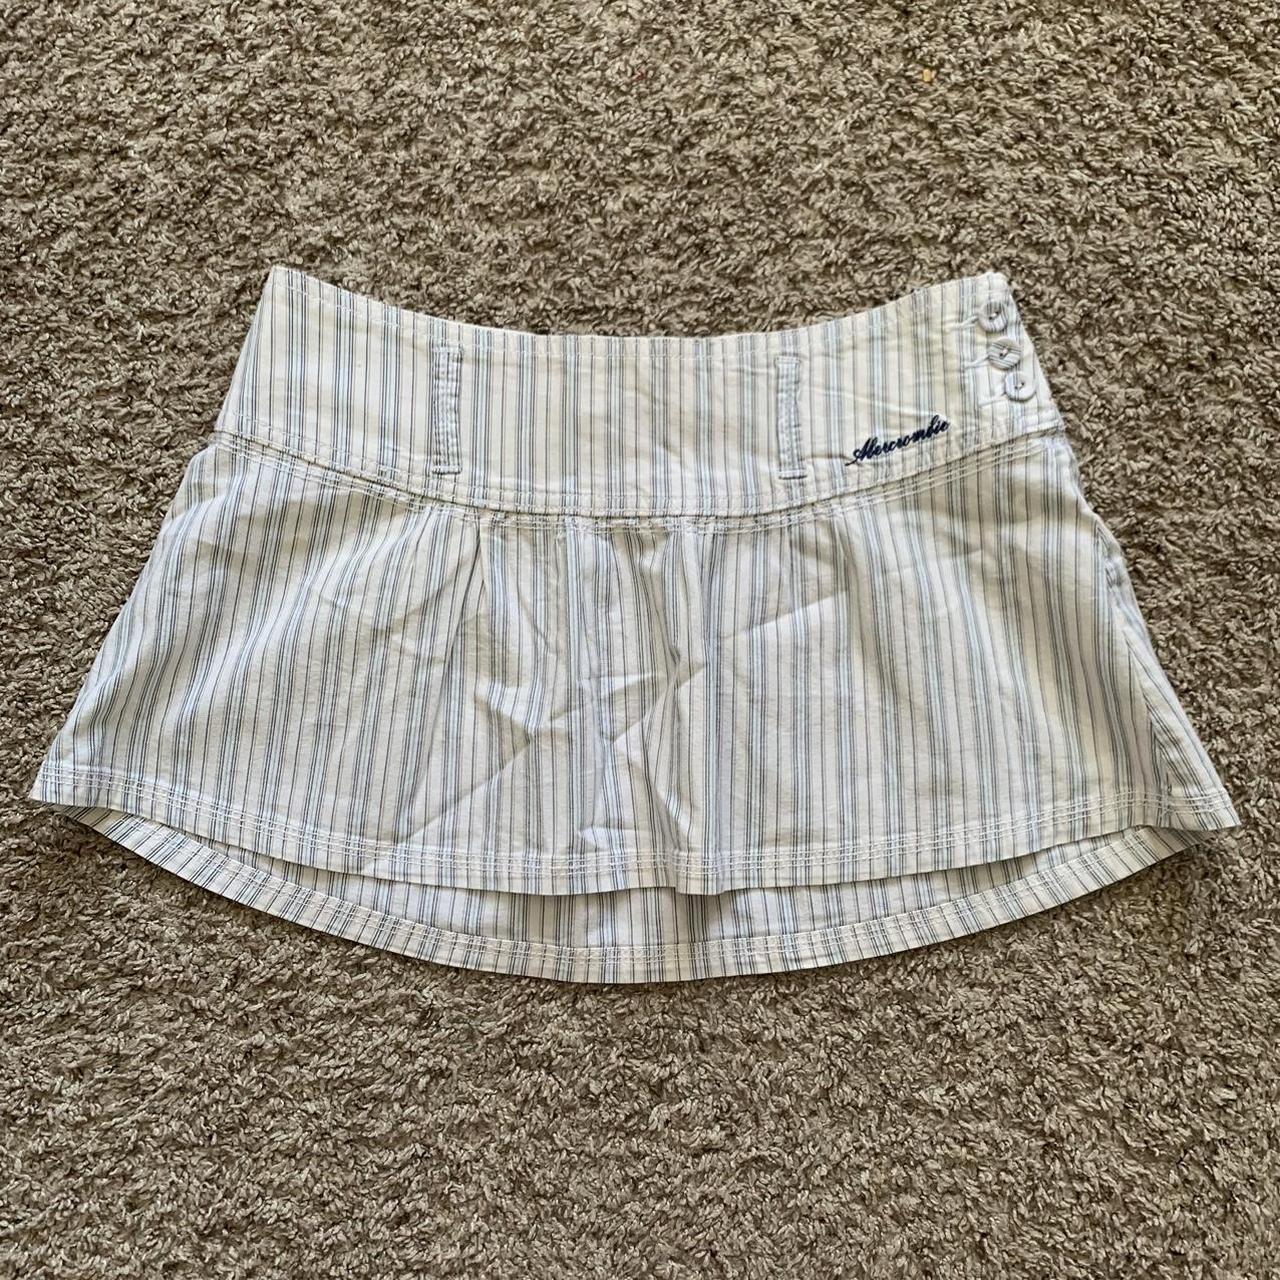 Abercrombie & Fitch Women's Blue and White Skirt | Depop